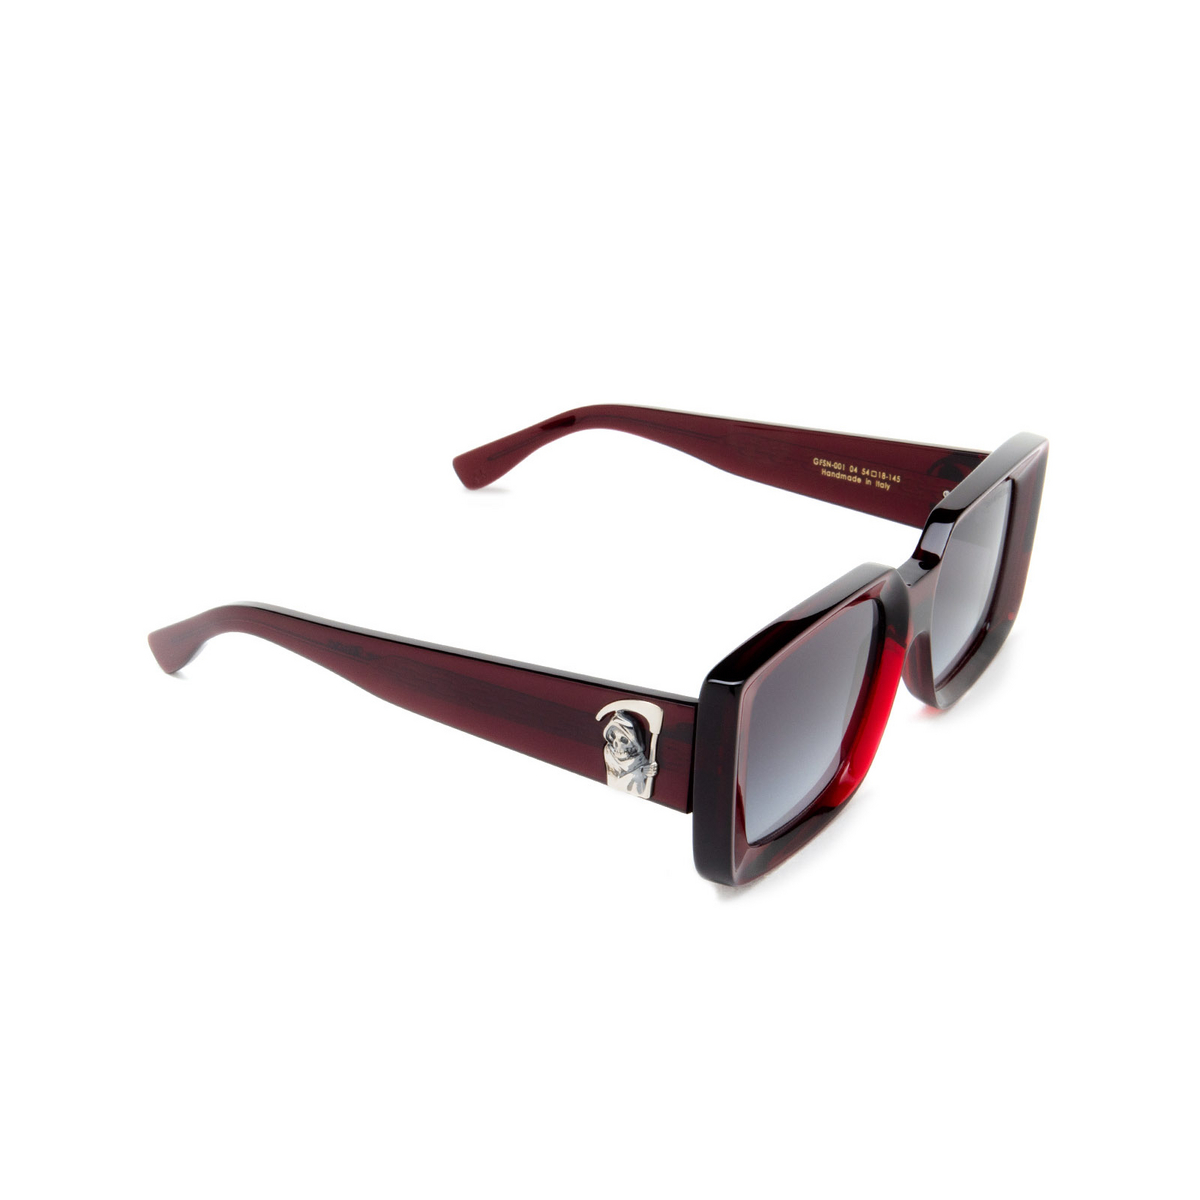 Cutler and Gross 001 Sunglasses 04 Bordeaux - three-quarters view